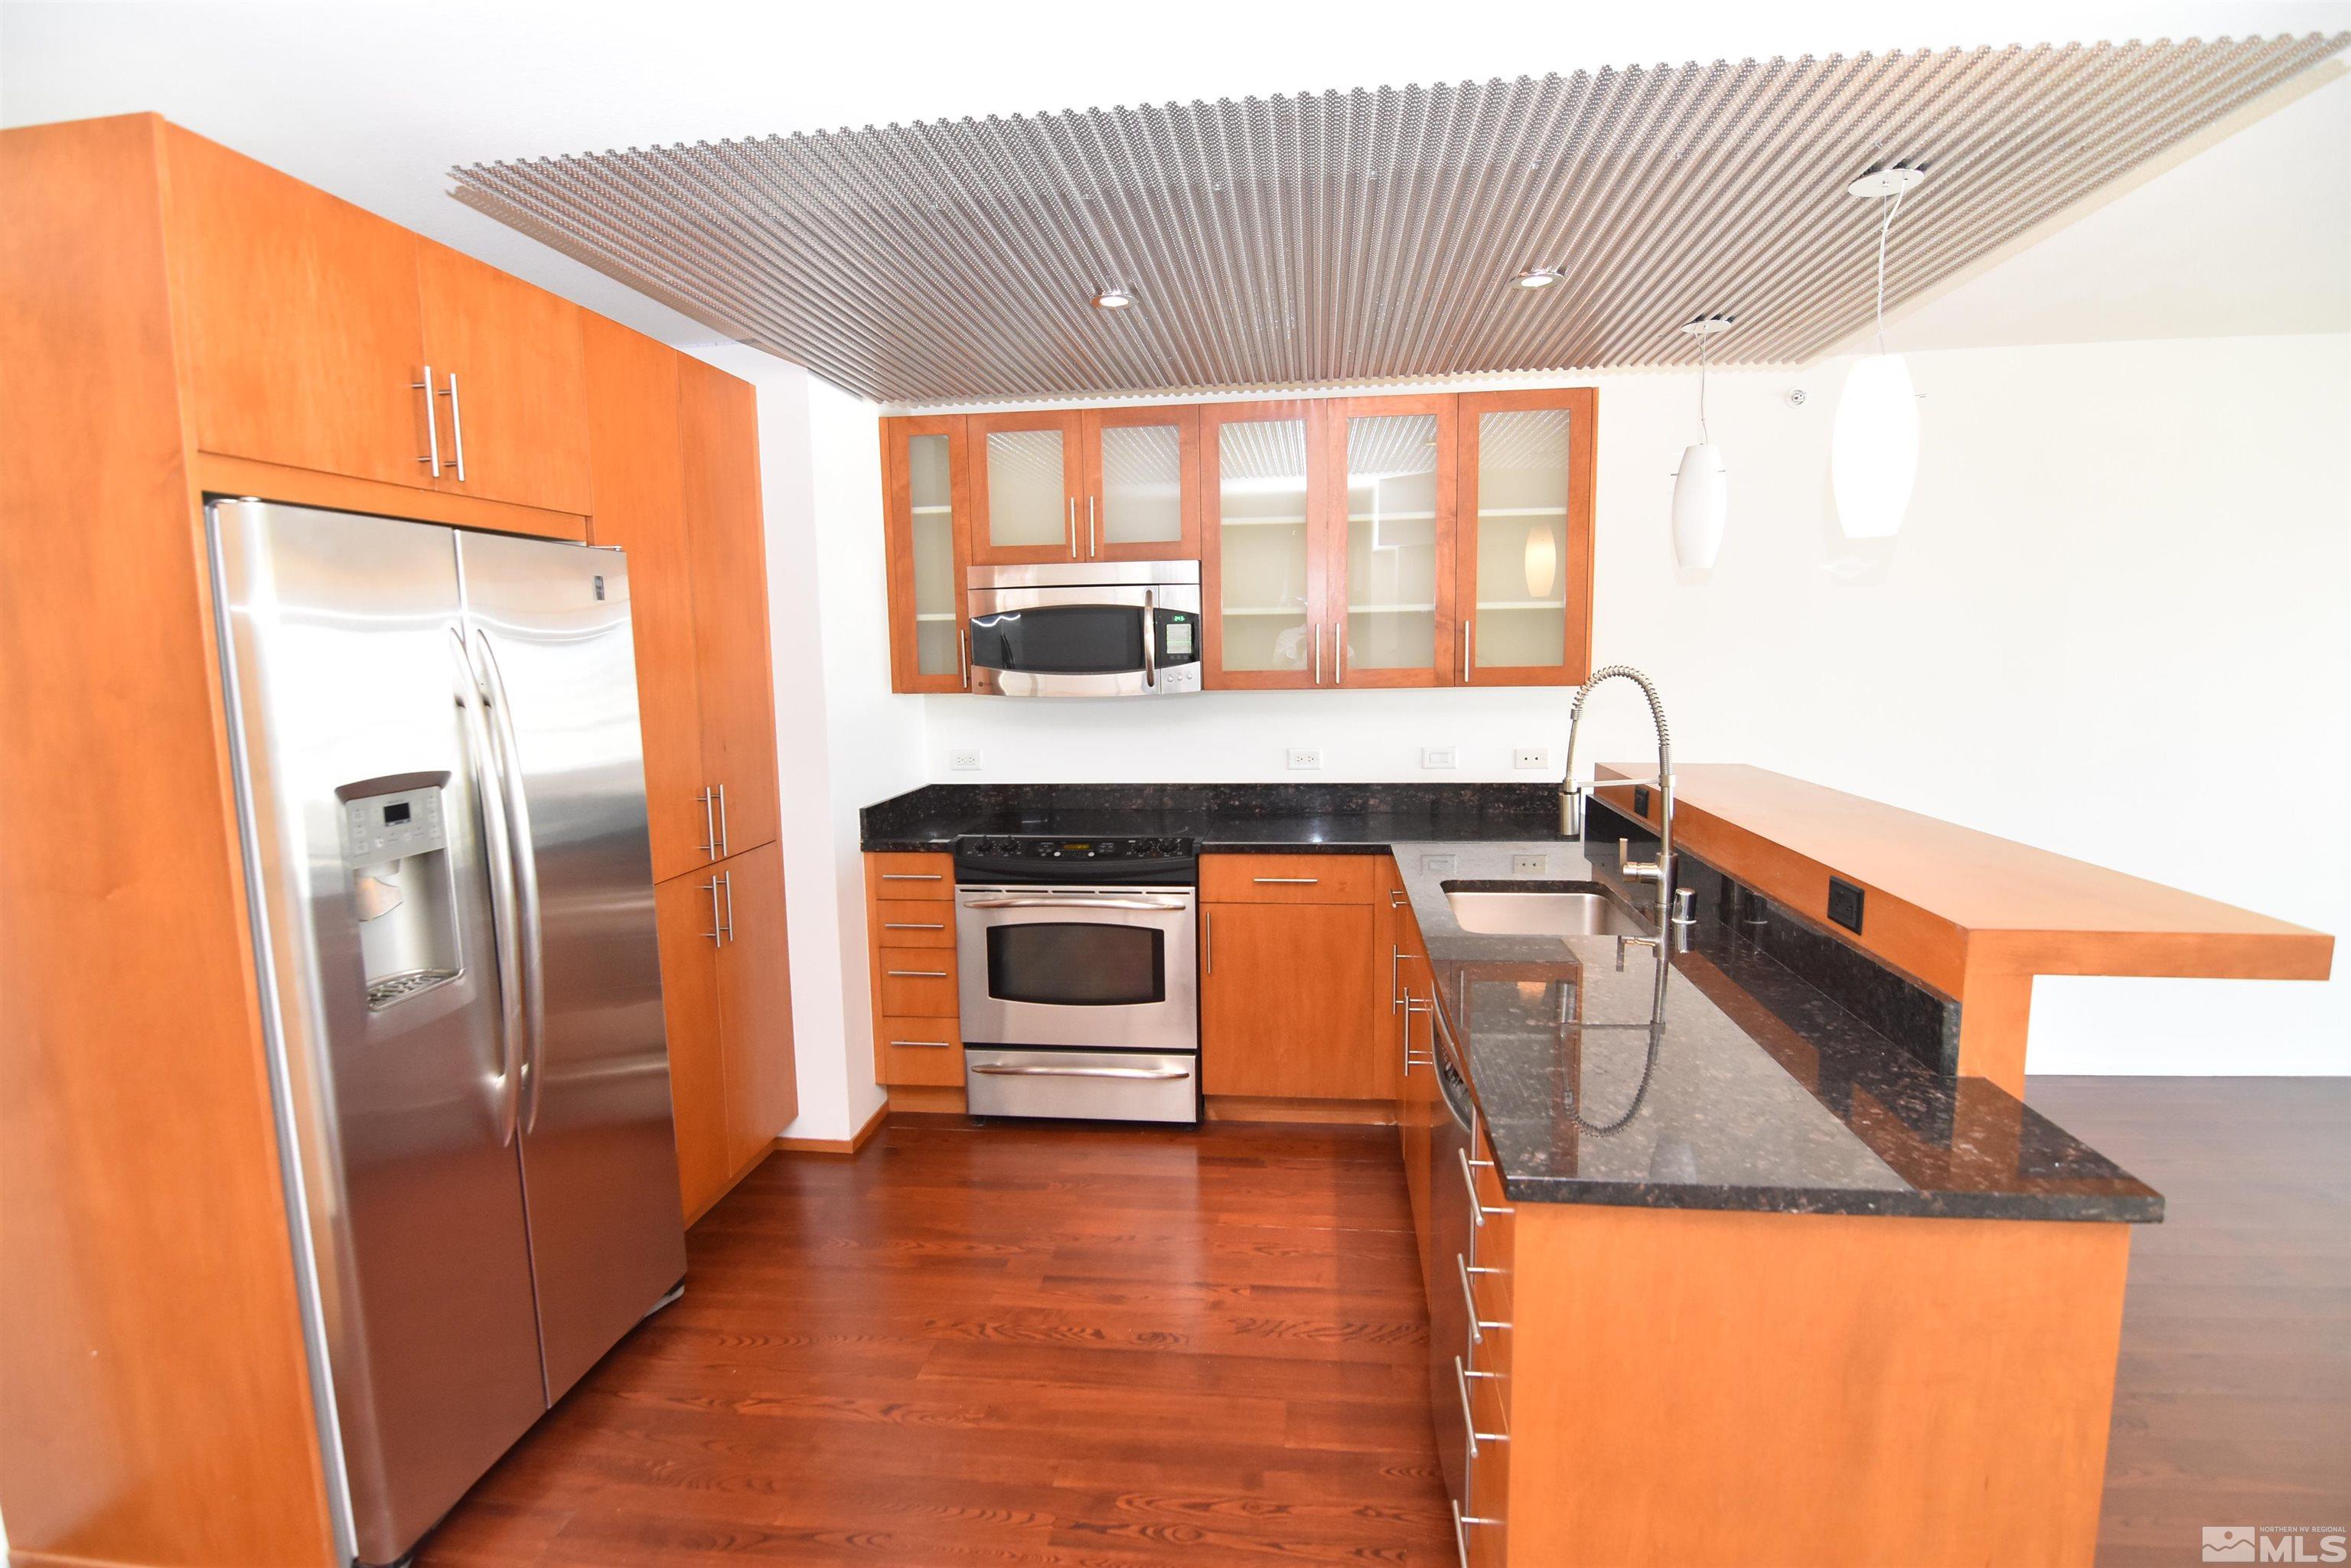 a kitchen with stainless steel appliances granite countertop a refrigerator a stove and a wooden floor